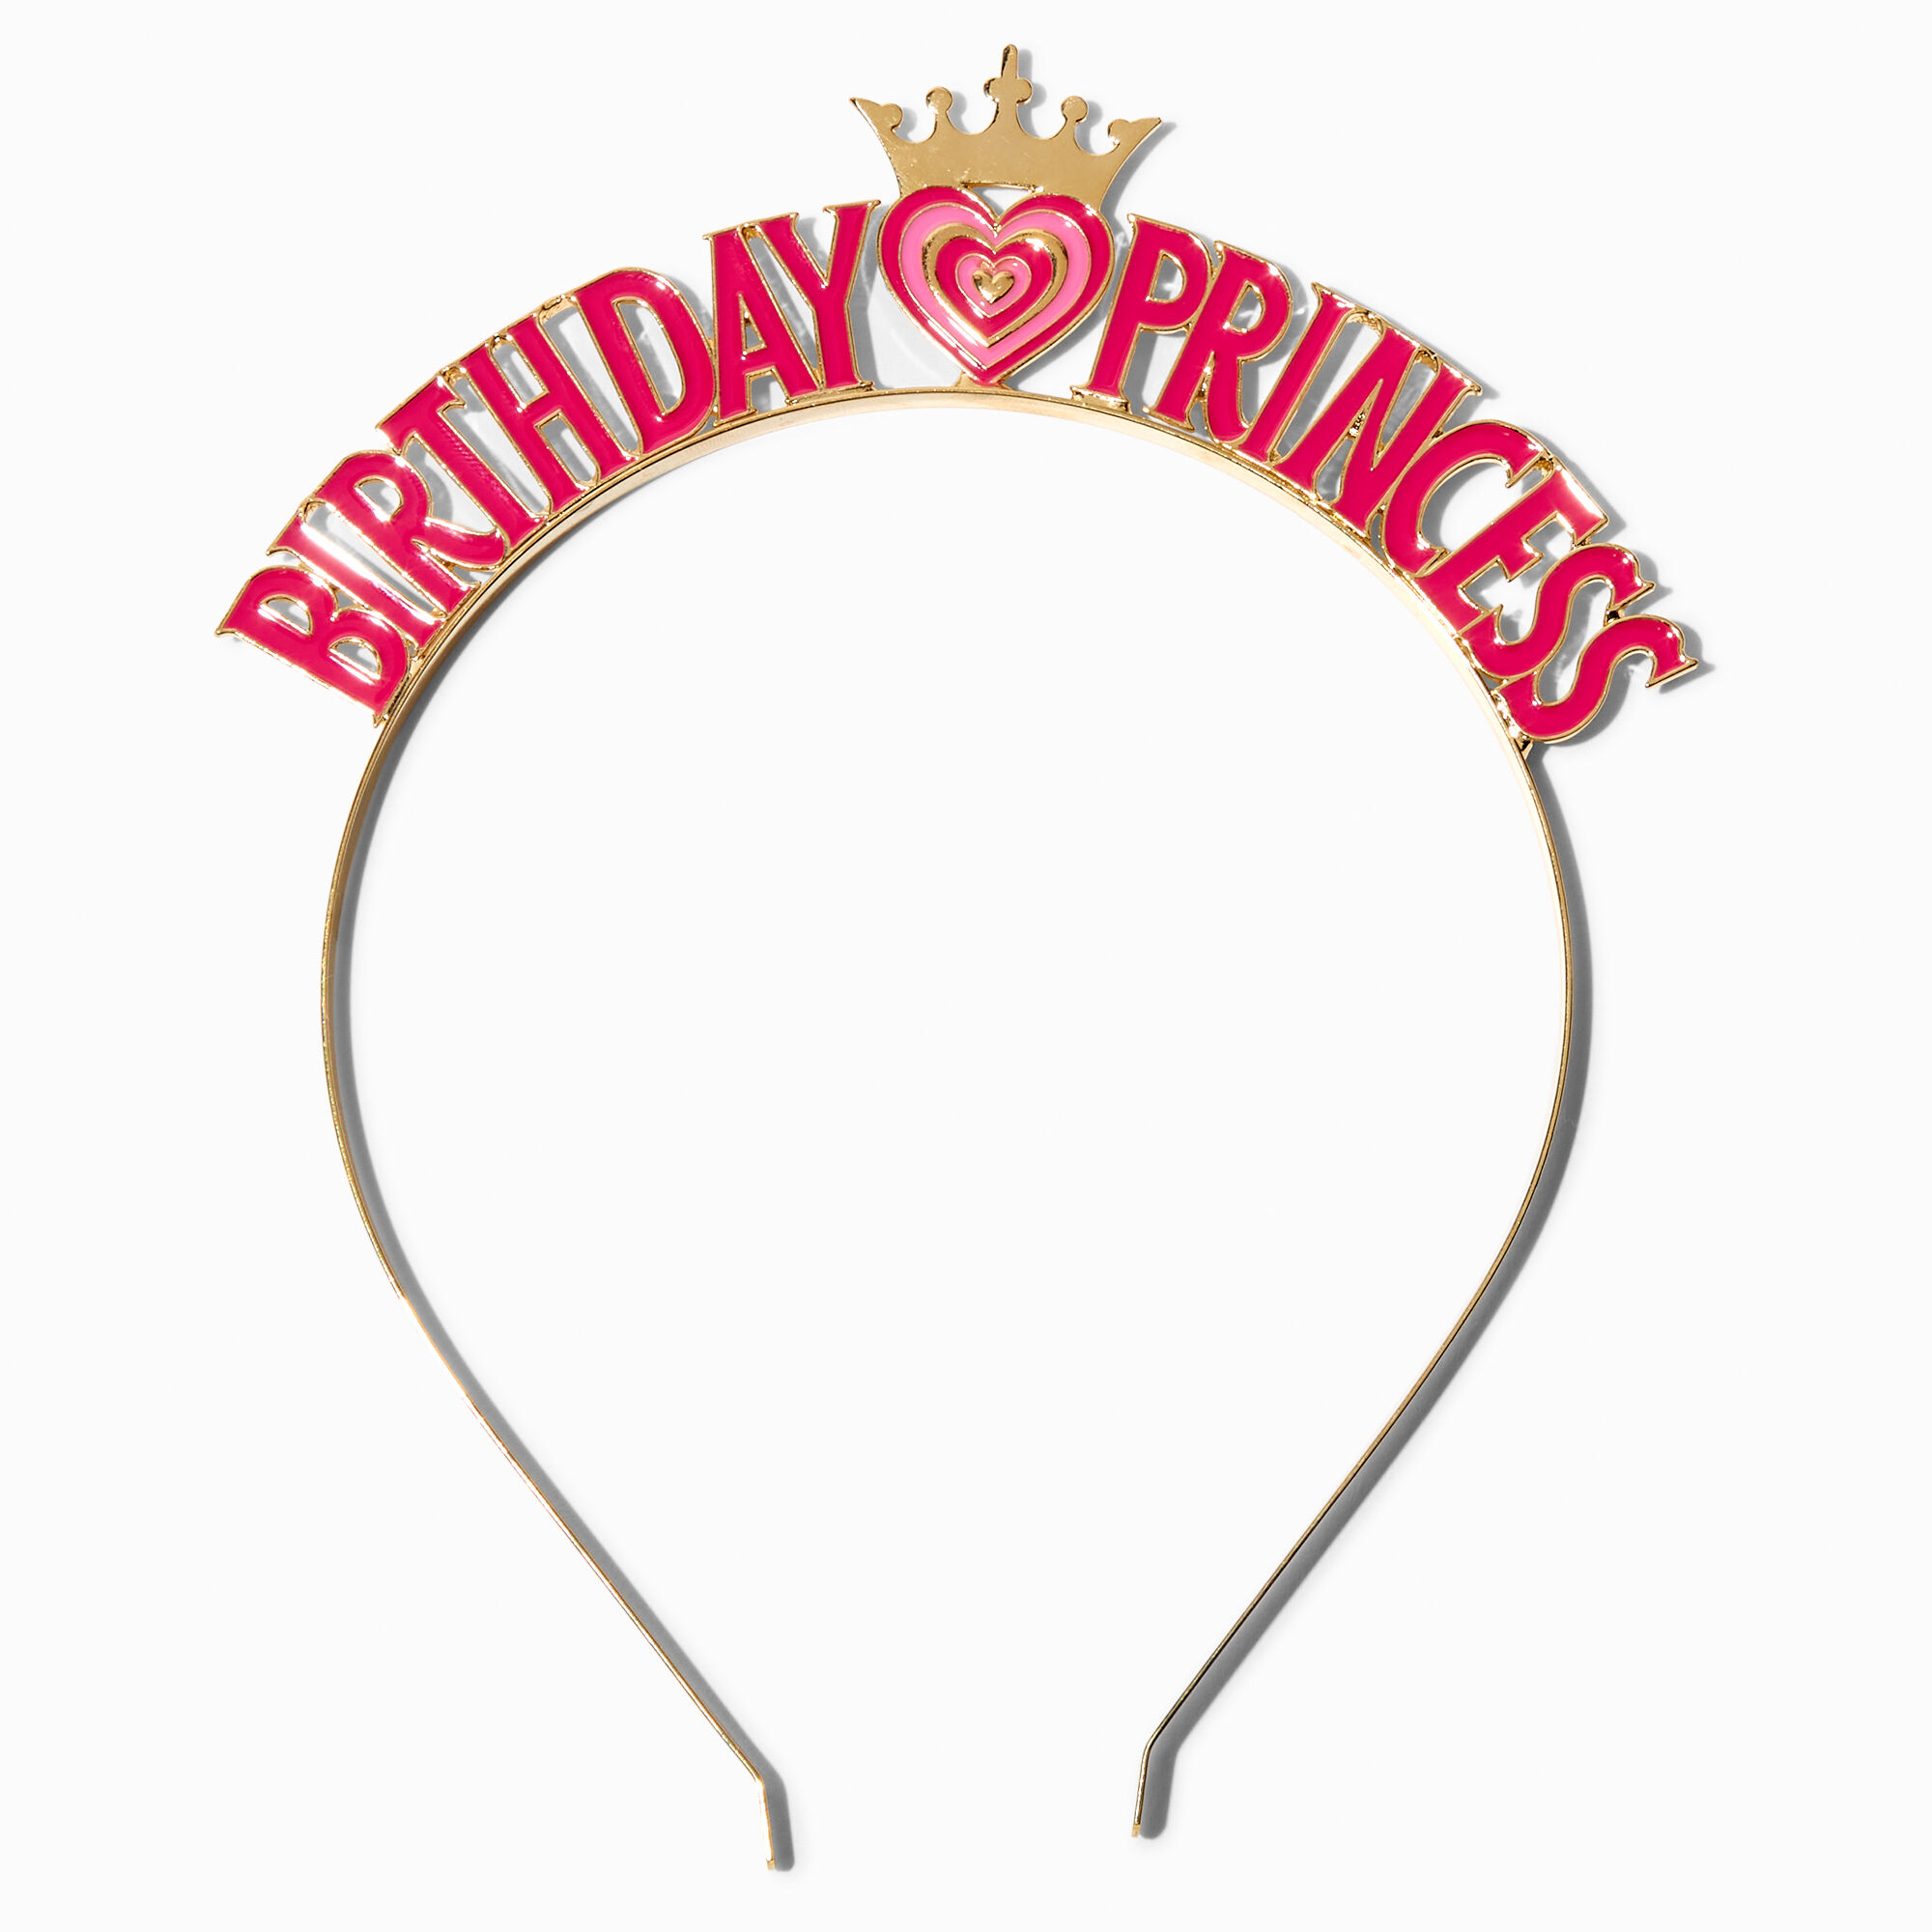 View Claires Birthday Princess Crown Hearts Headband Gold information